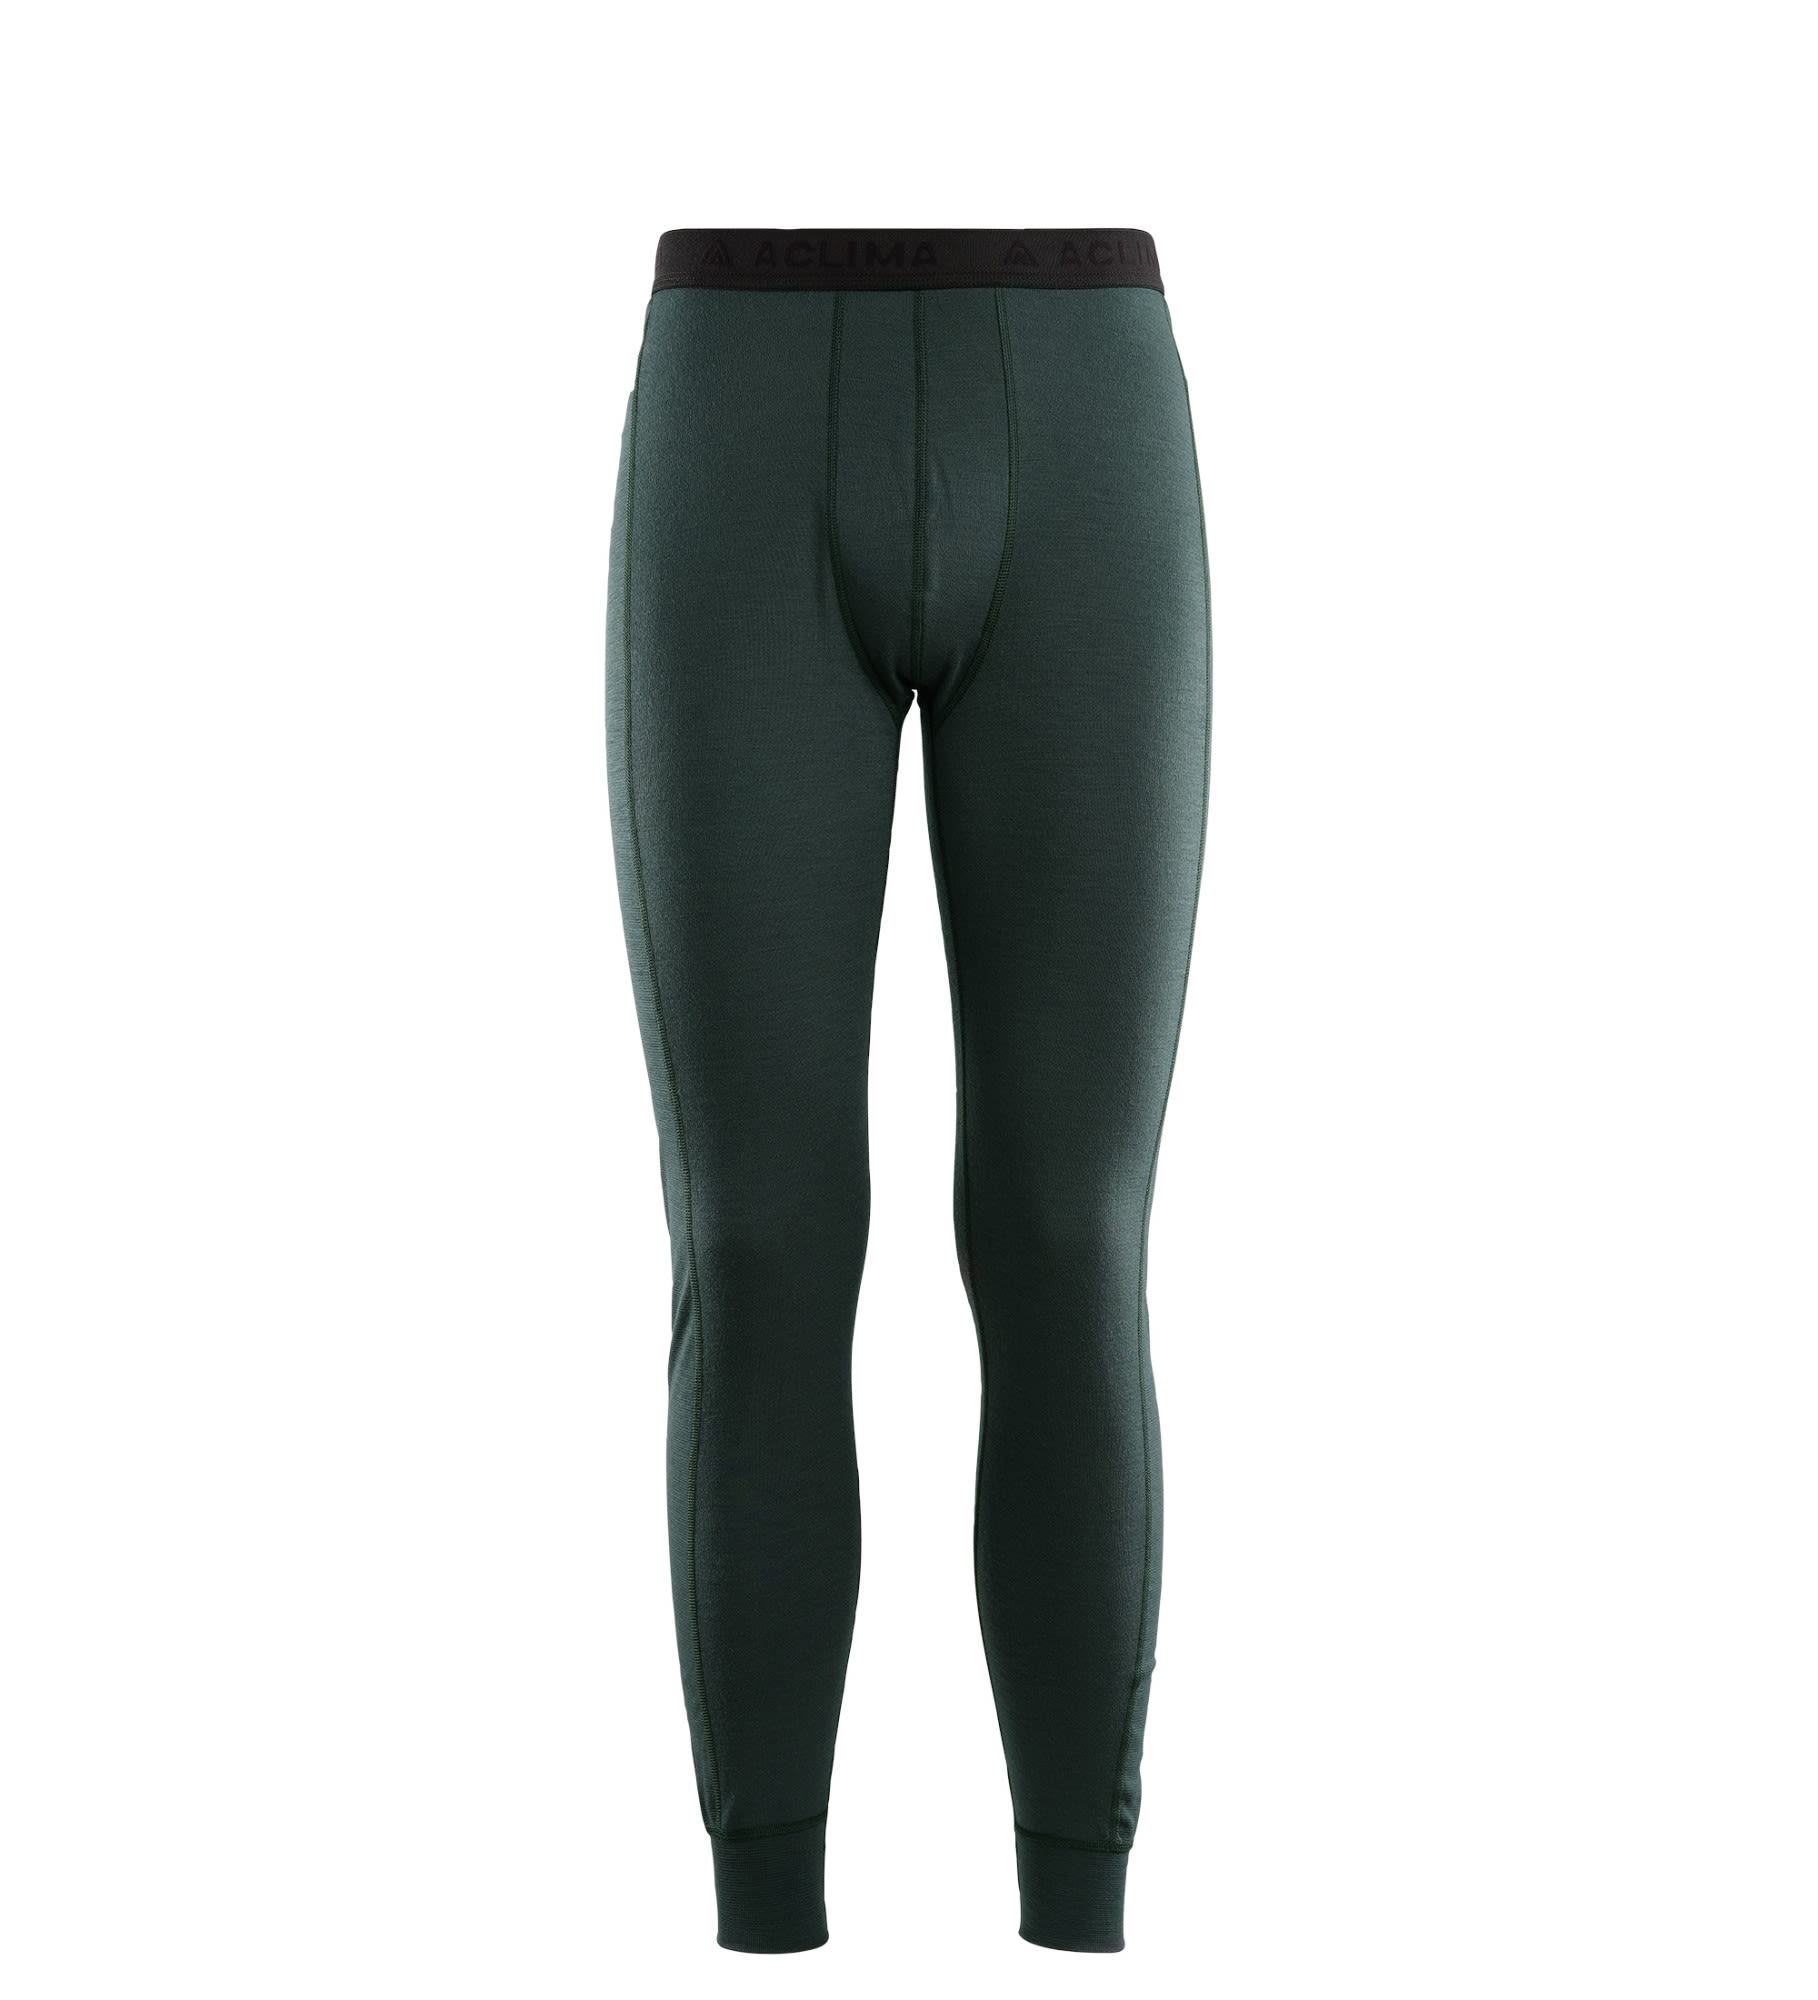 Aclima Warmwool Long Pants Grn- Male Merino Leggings und Tights- Grsse S - Farbe Green Gables unter Aclima